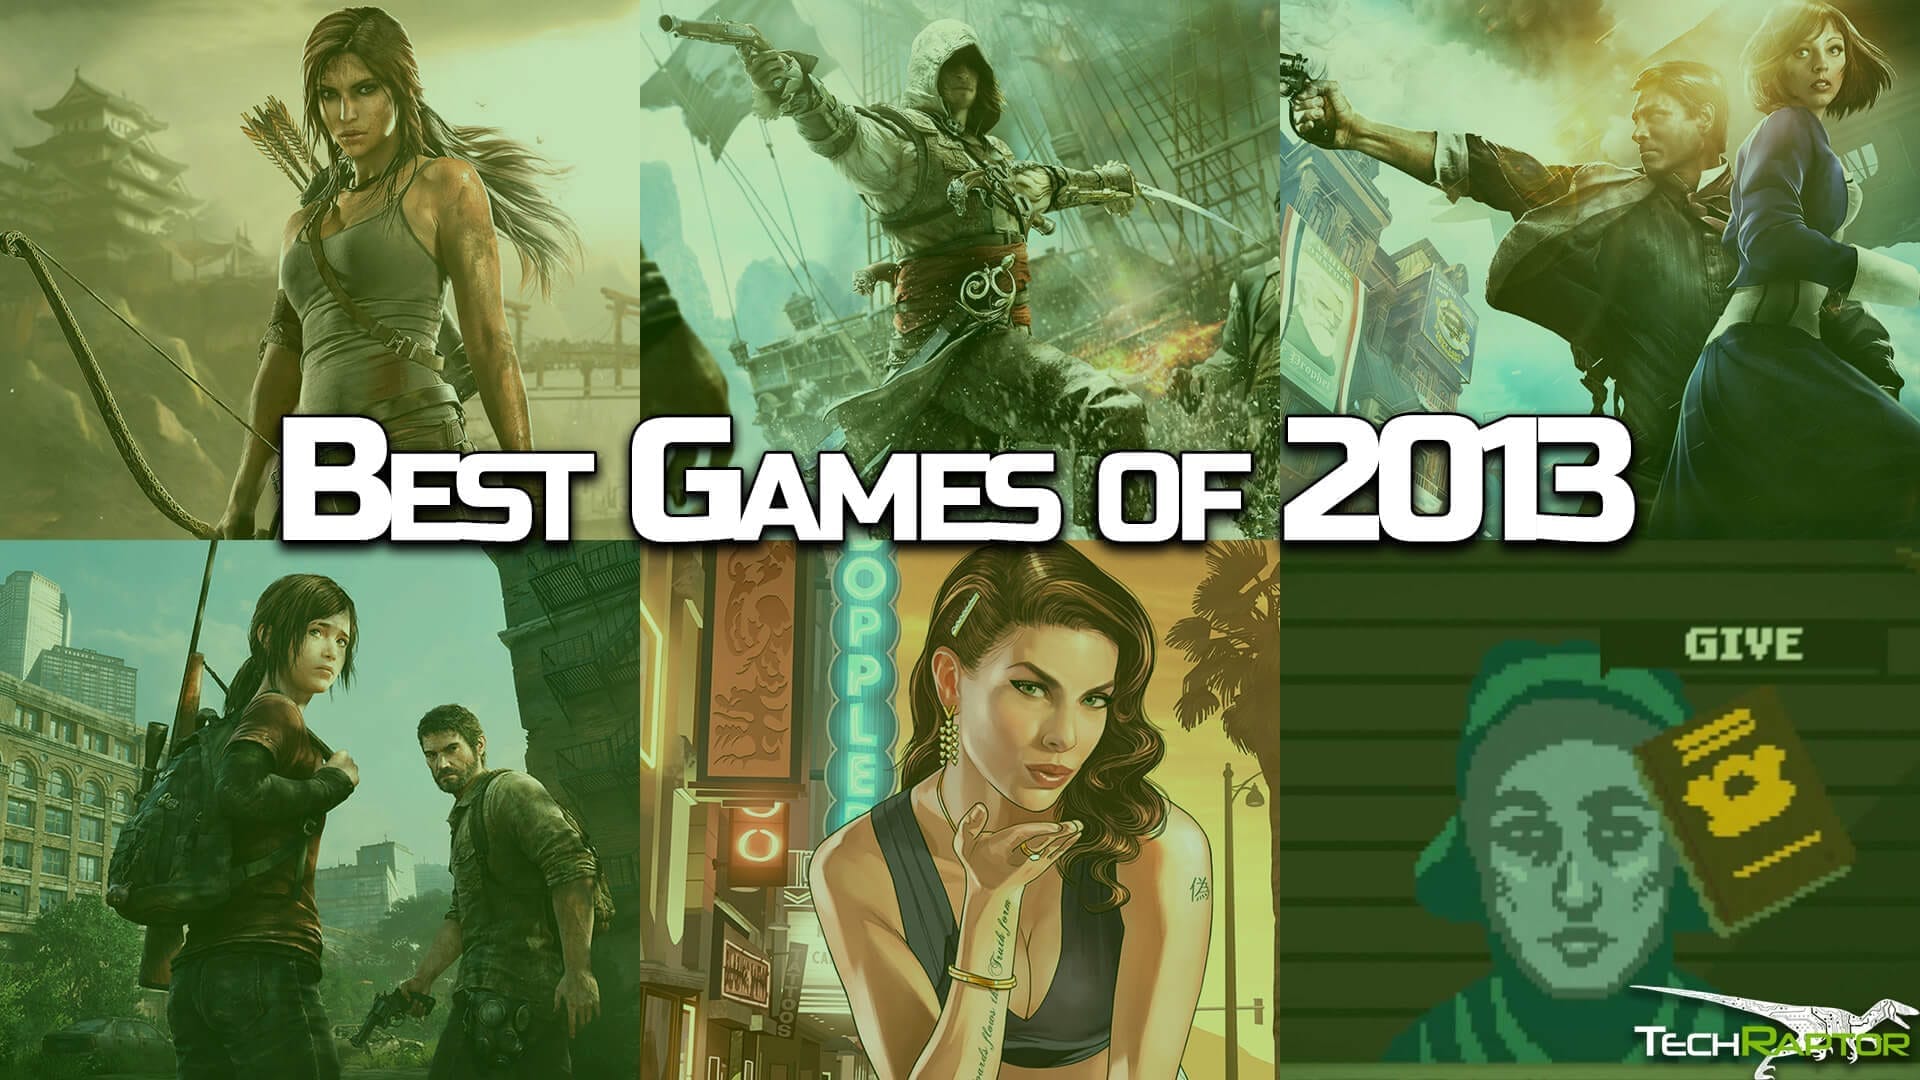 2013's Best Game: Game of the Year